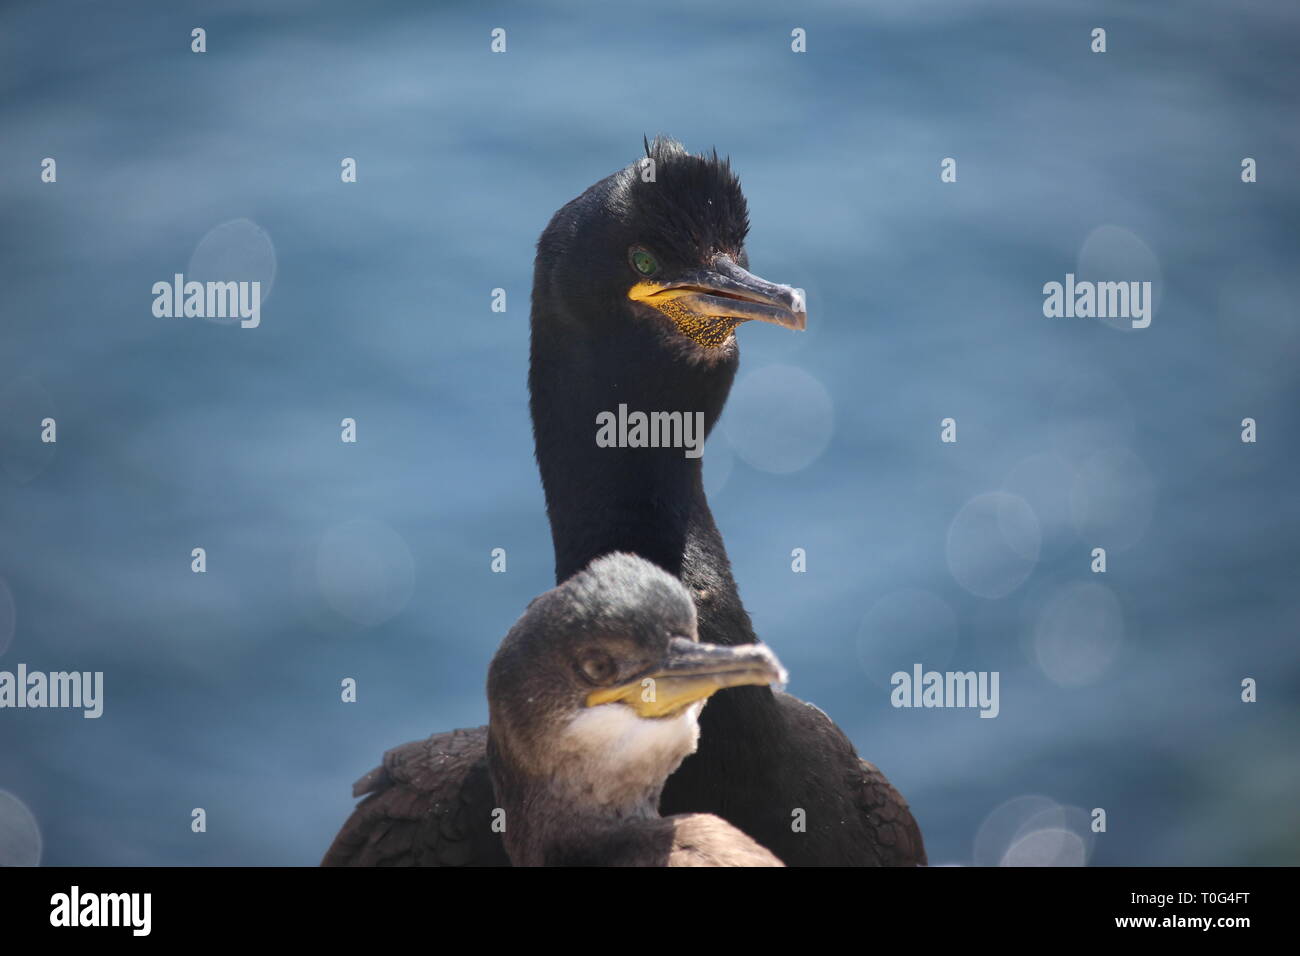 A Common Shag nesting on cliffs, Northumberland coast. Young nestling. Stock Photo